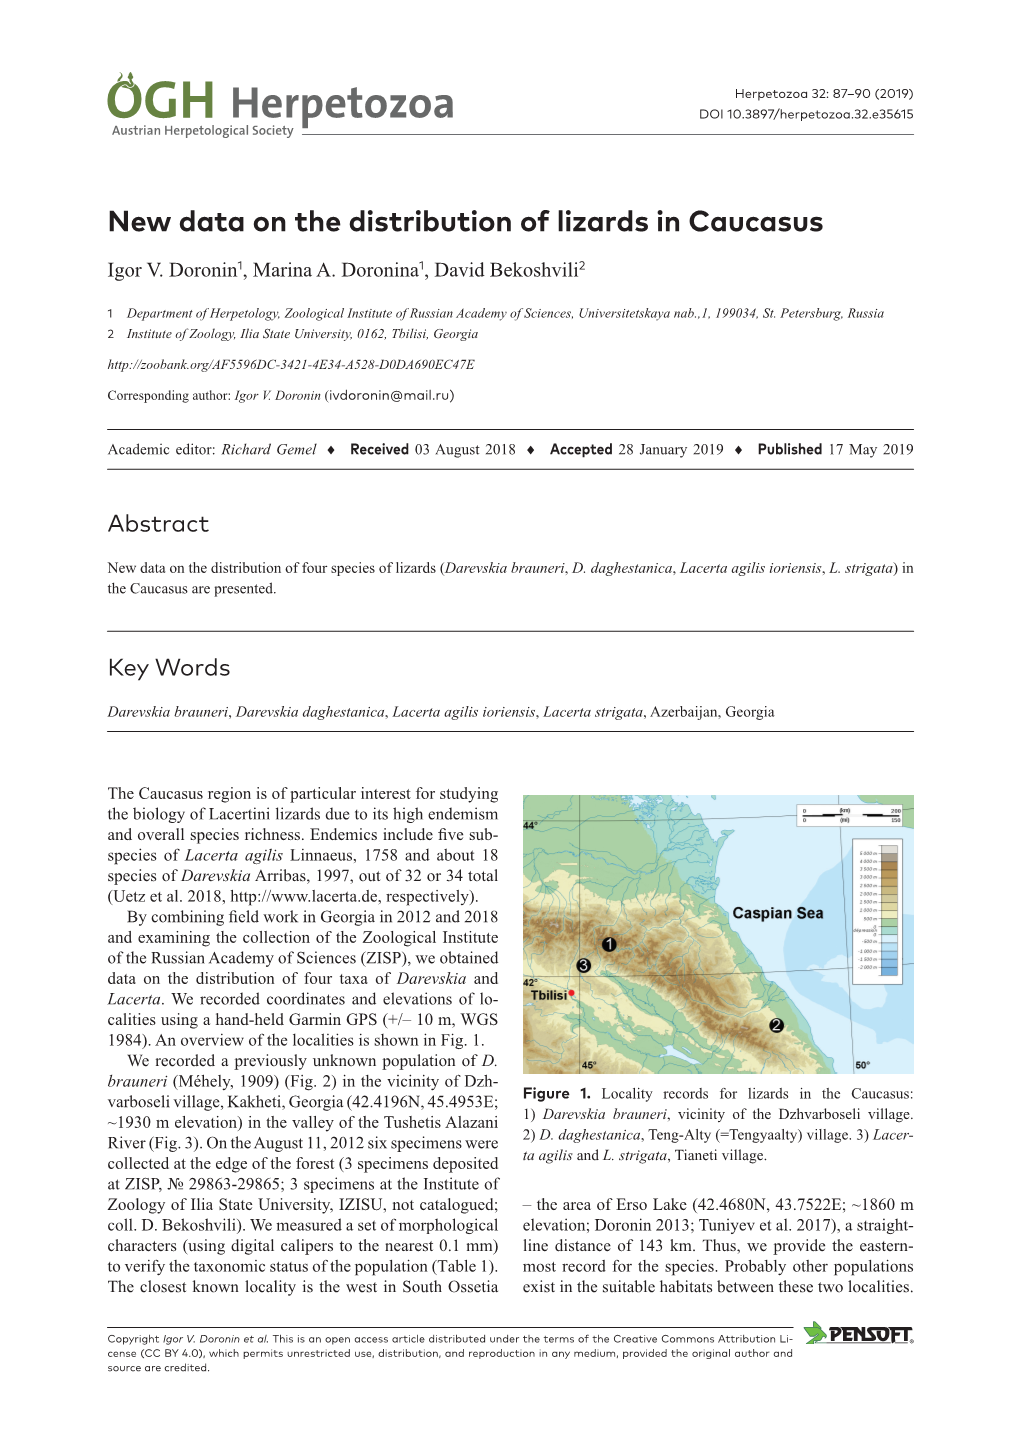 New Data on the Distribution of Lizards in Caucasus